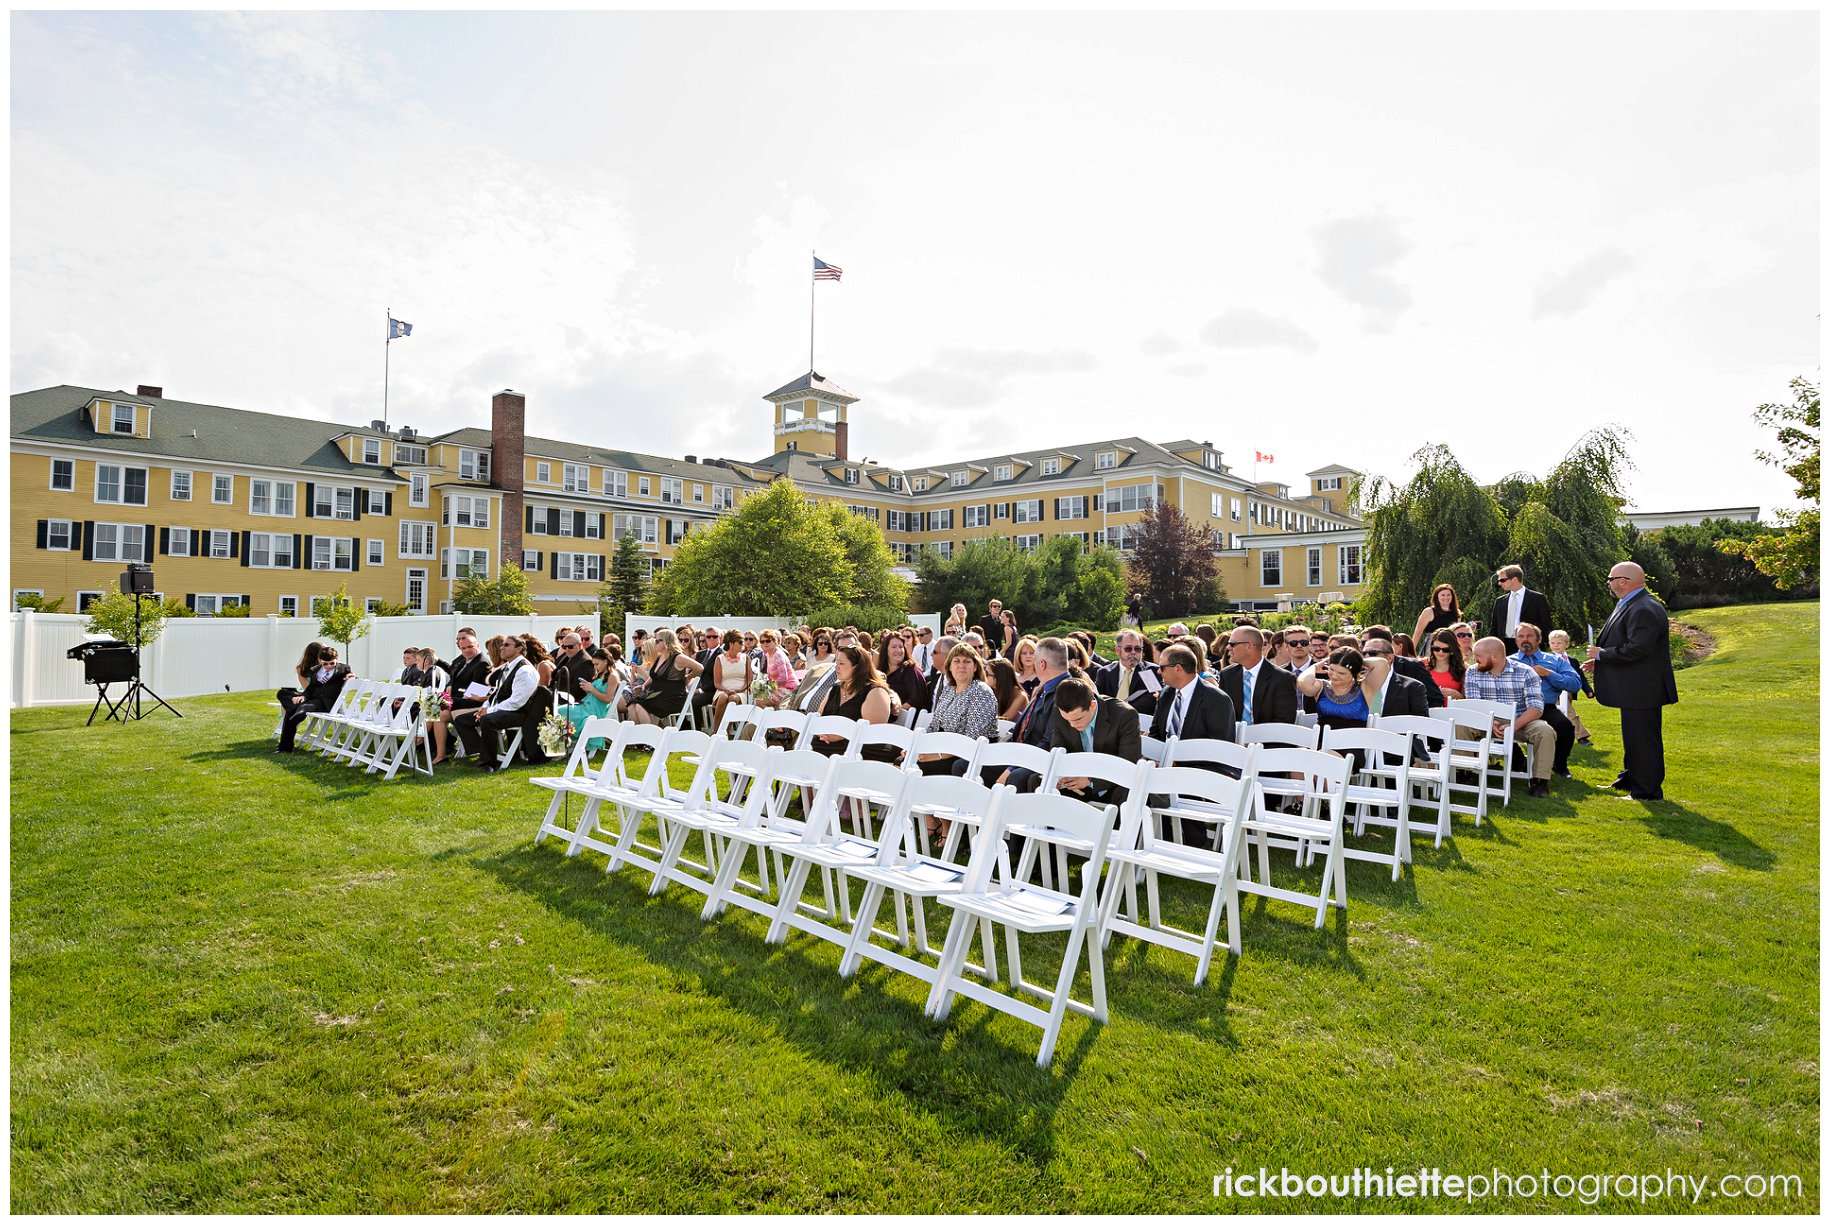 guest gather for wedding ceremony, Mountain View Grand hotel in background